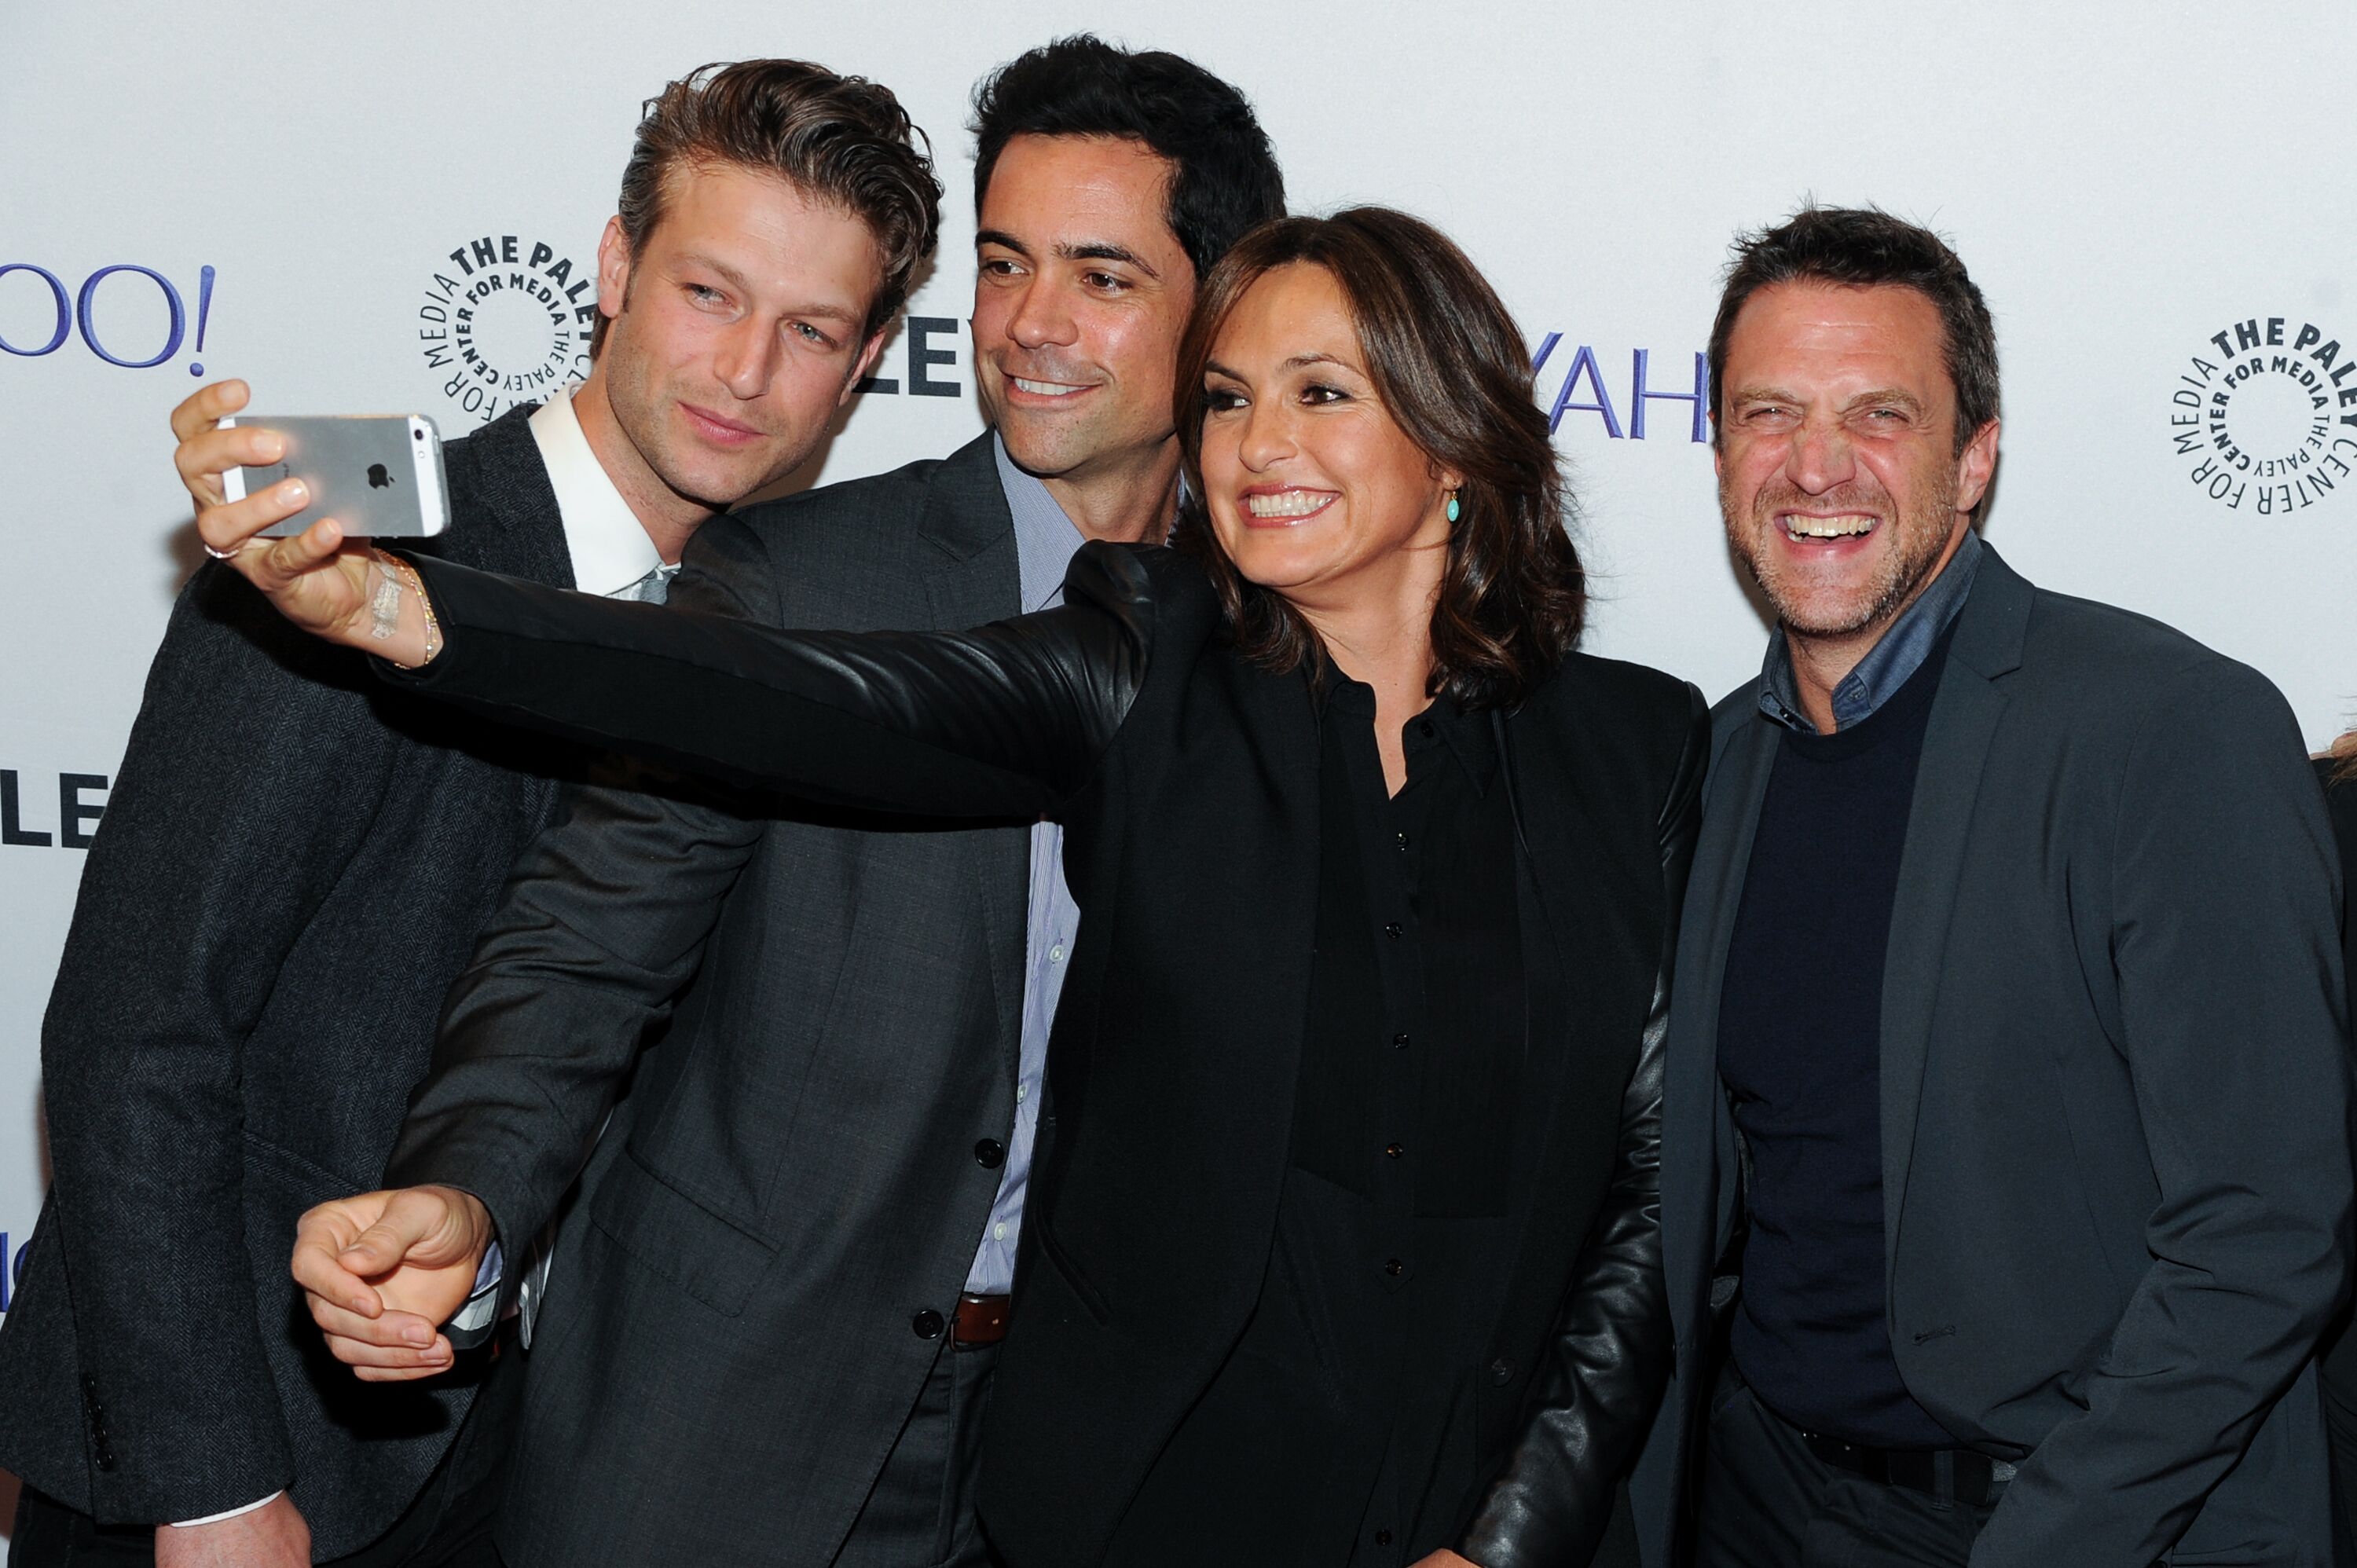 Peter Scanavino, Danny Pino, Mariska Hargitay and Raul Esparza at the 2nd Annual Paleyfest "New York Presents; Law & Order: SVU" in 2014 | Source: Getty Images